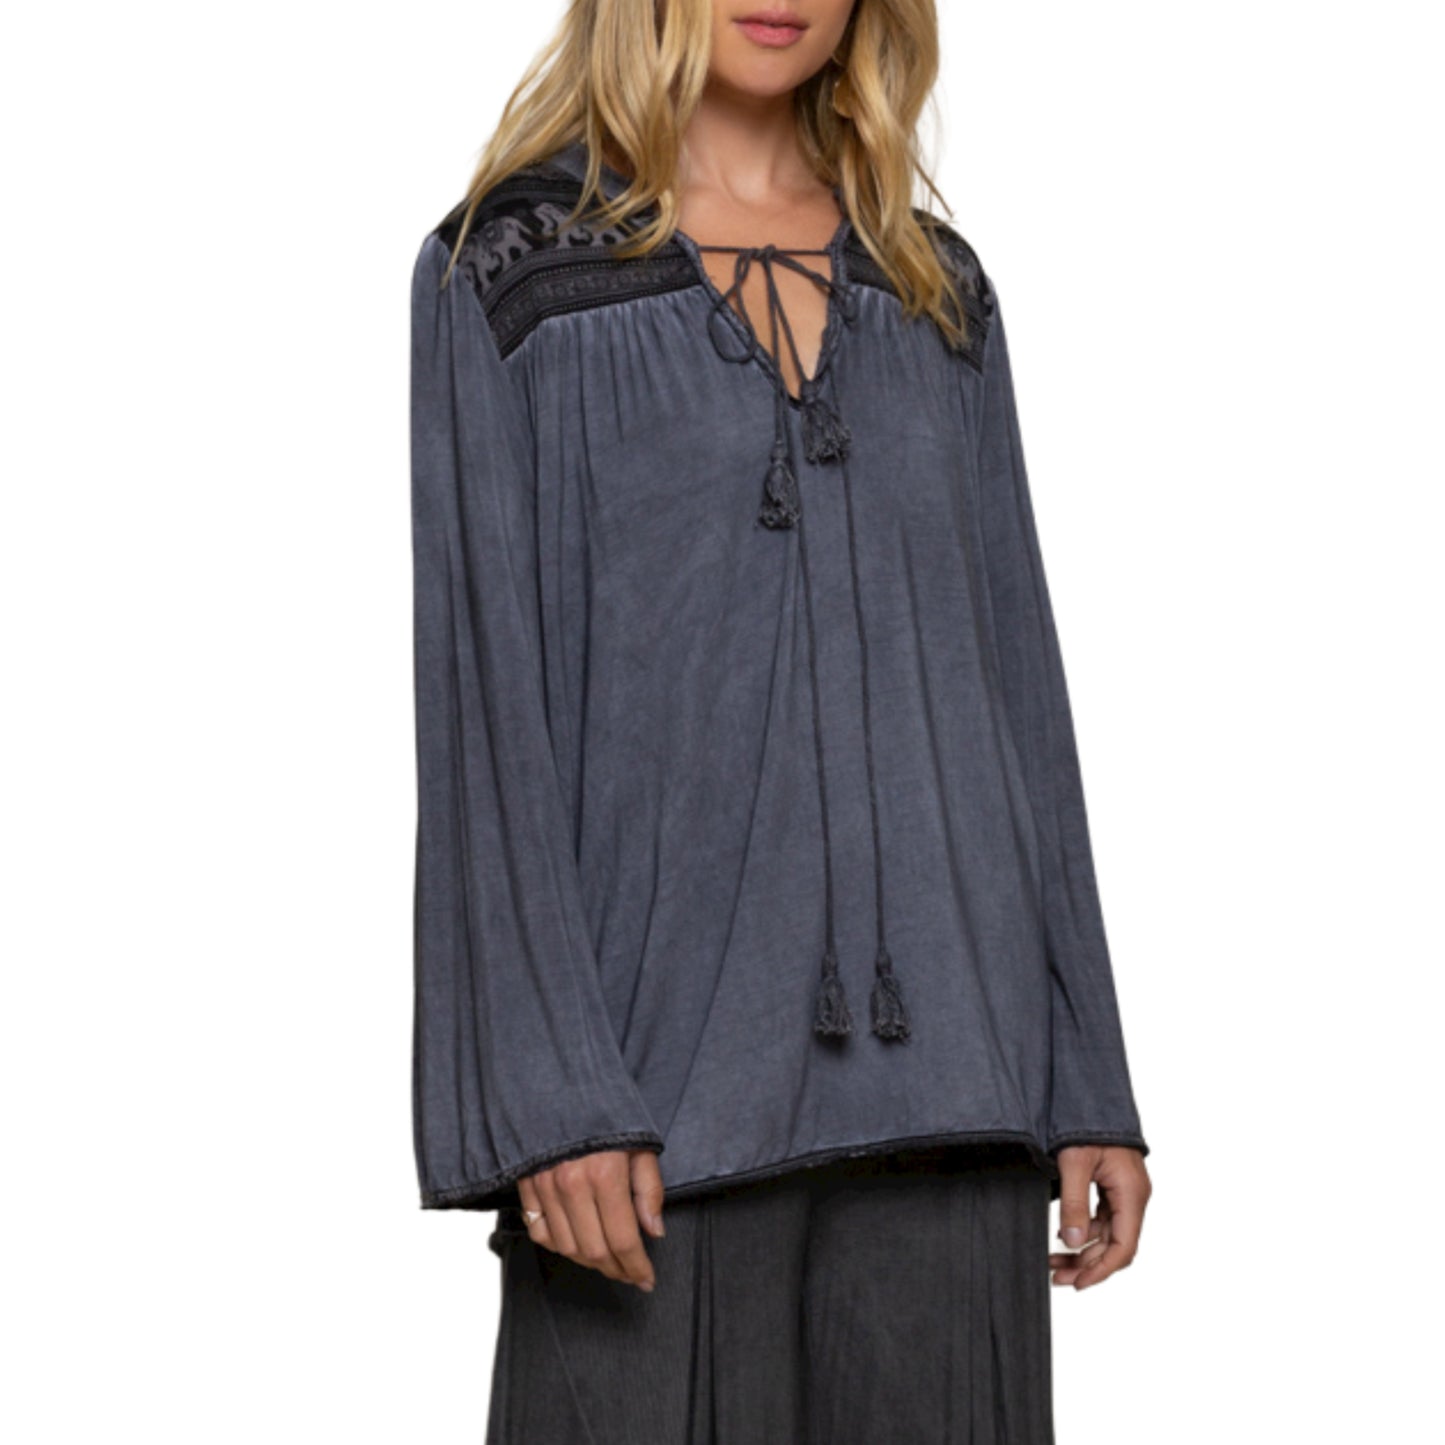 POL Boho Lace with Tassels Wide Sleeve Relaxed Fit Blouse Tunic Top